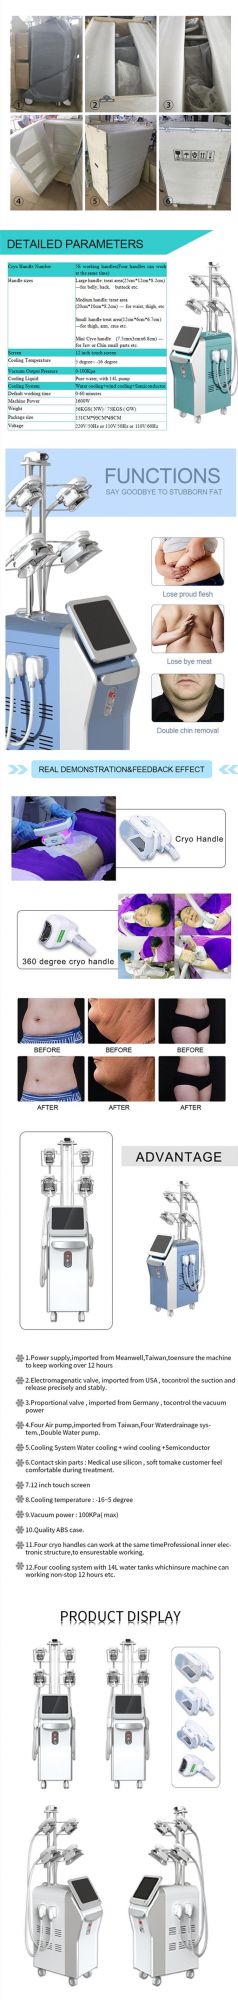 5 Cryo Head Cool Slimming Weight Loss Cryotherapy Machine